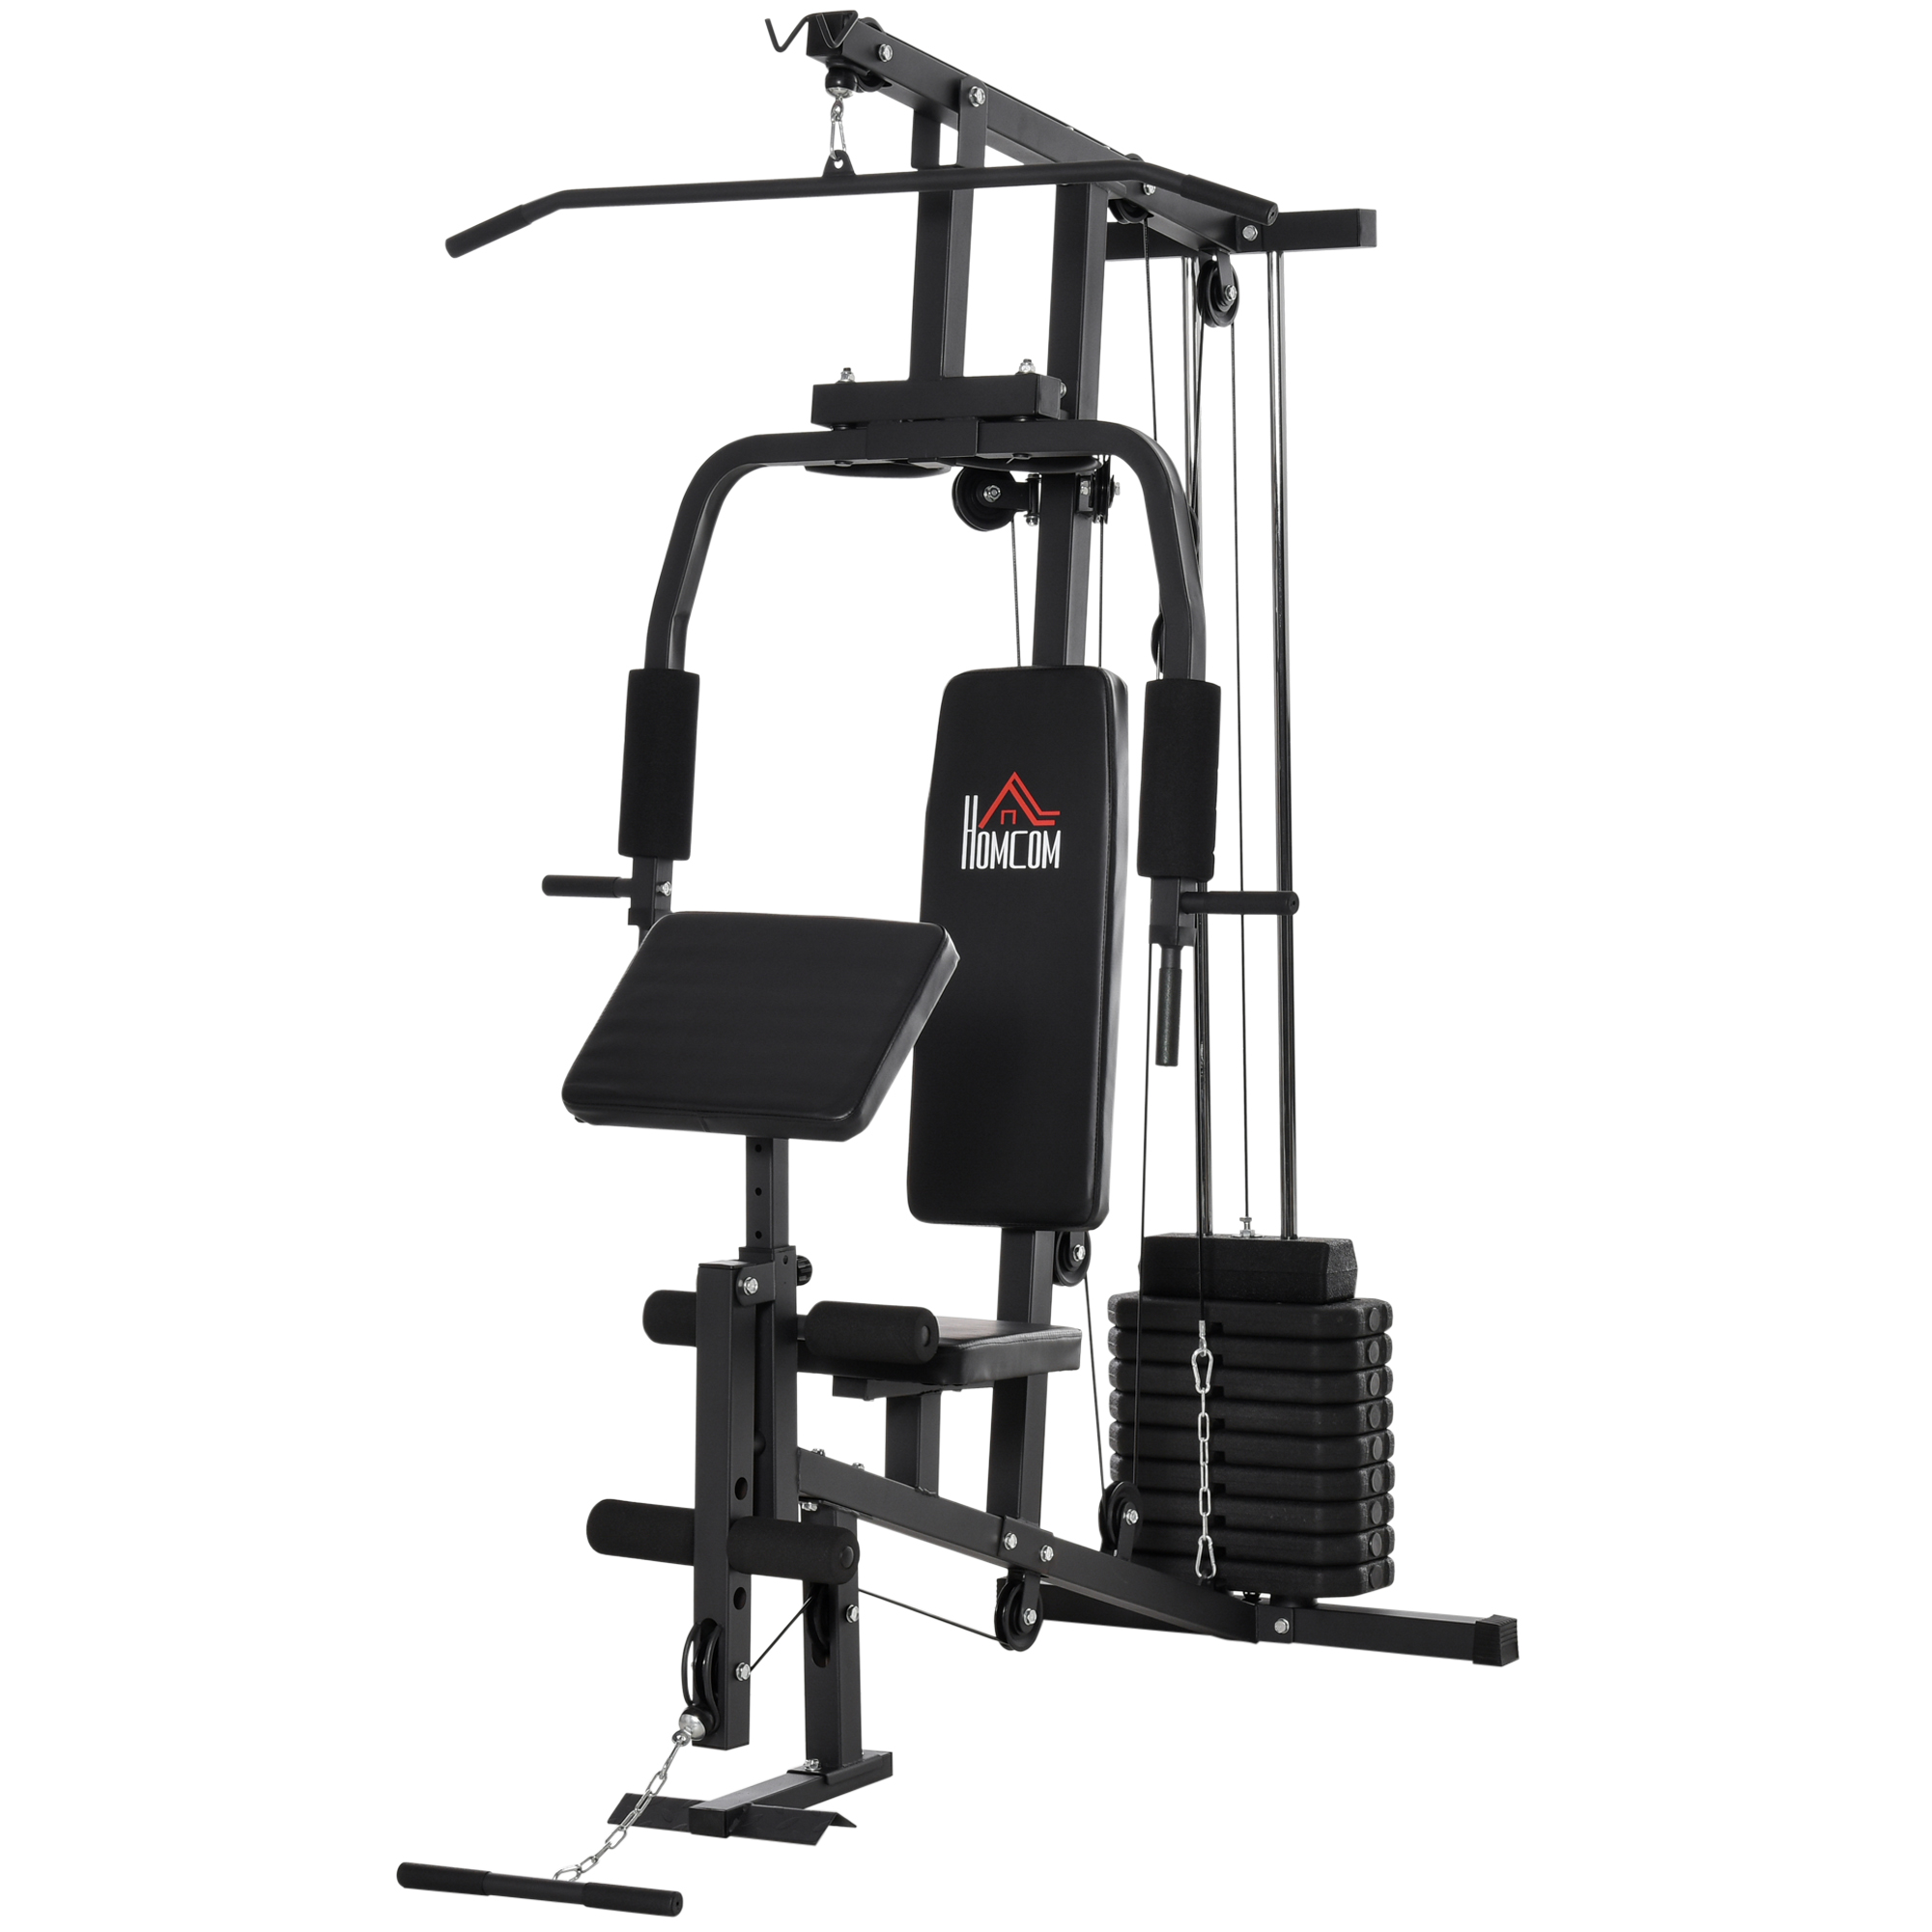 HOMCOM Fitness Station for Home and Professional Workout